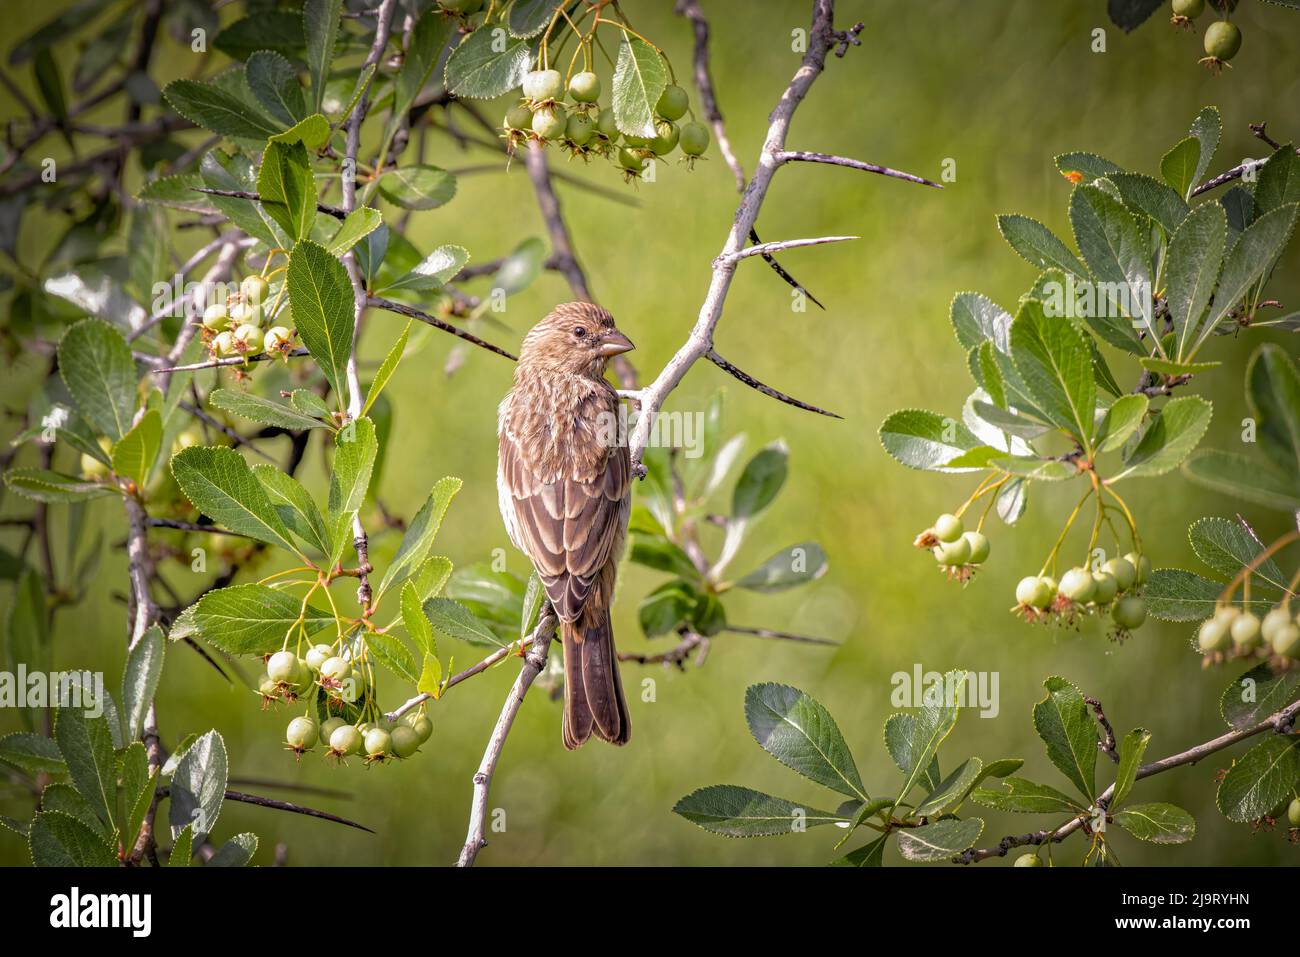 USA, Colorado, Fort Collins. Female house finch on thorny limb. Stock Photo